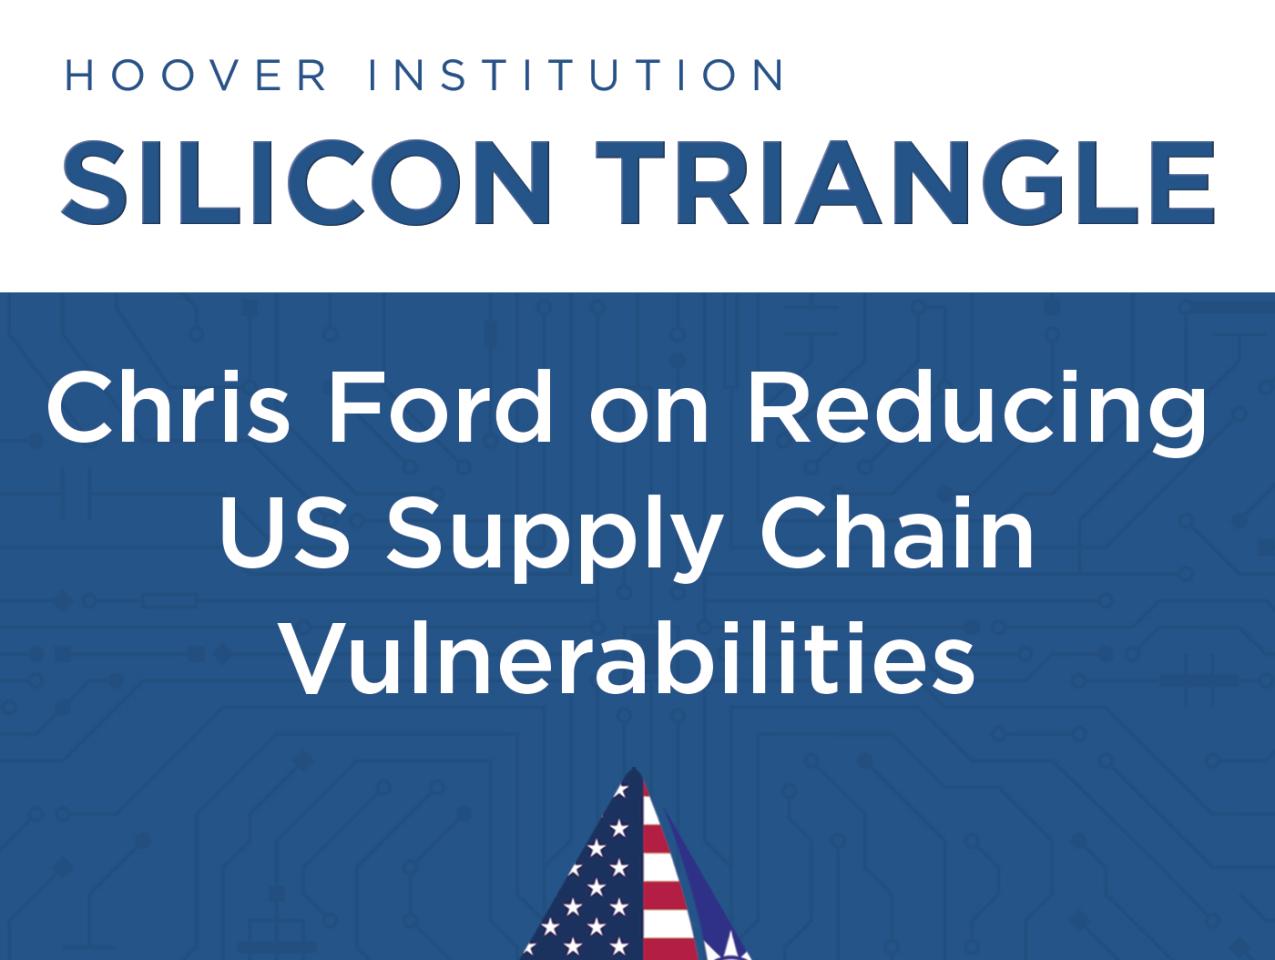 Chris Ford discusses the need for an insurance policy to mitigate vulnerabilities in American semiconductor supply chains